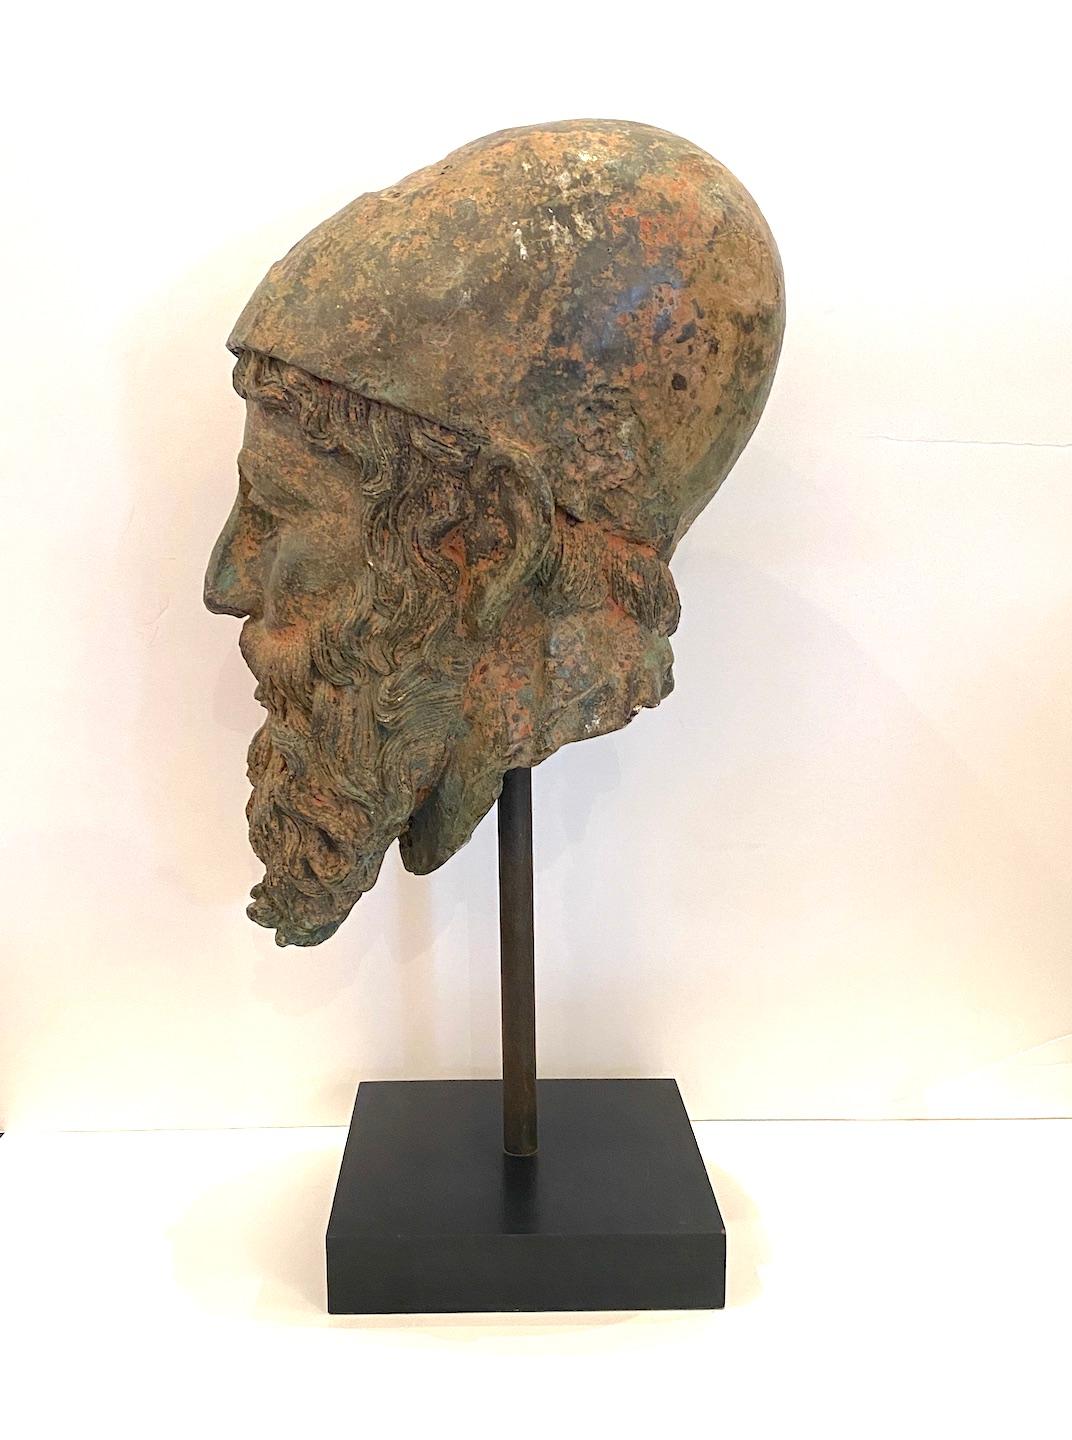 A mounted, cast bronze head of soldier in the Grand Tour style.